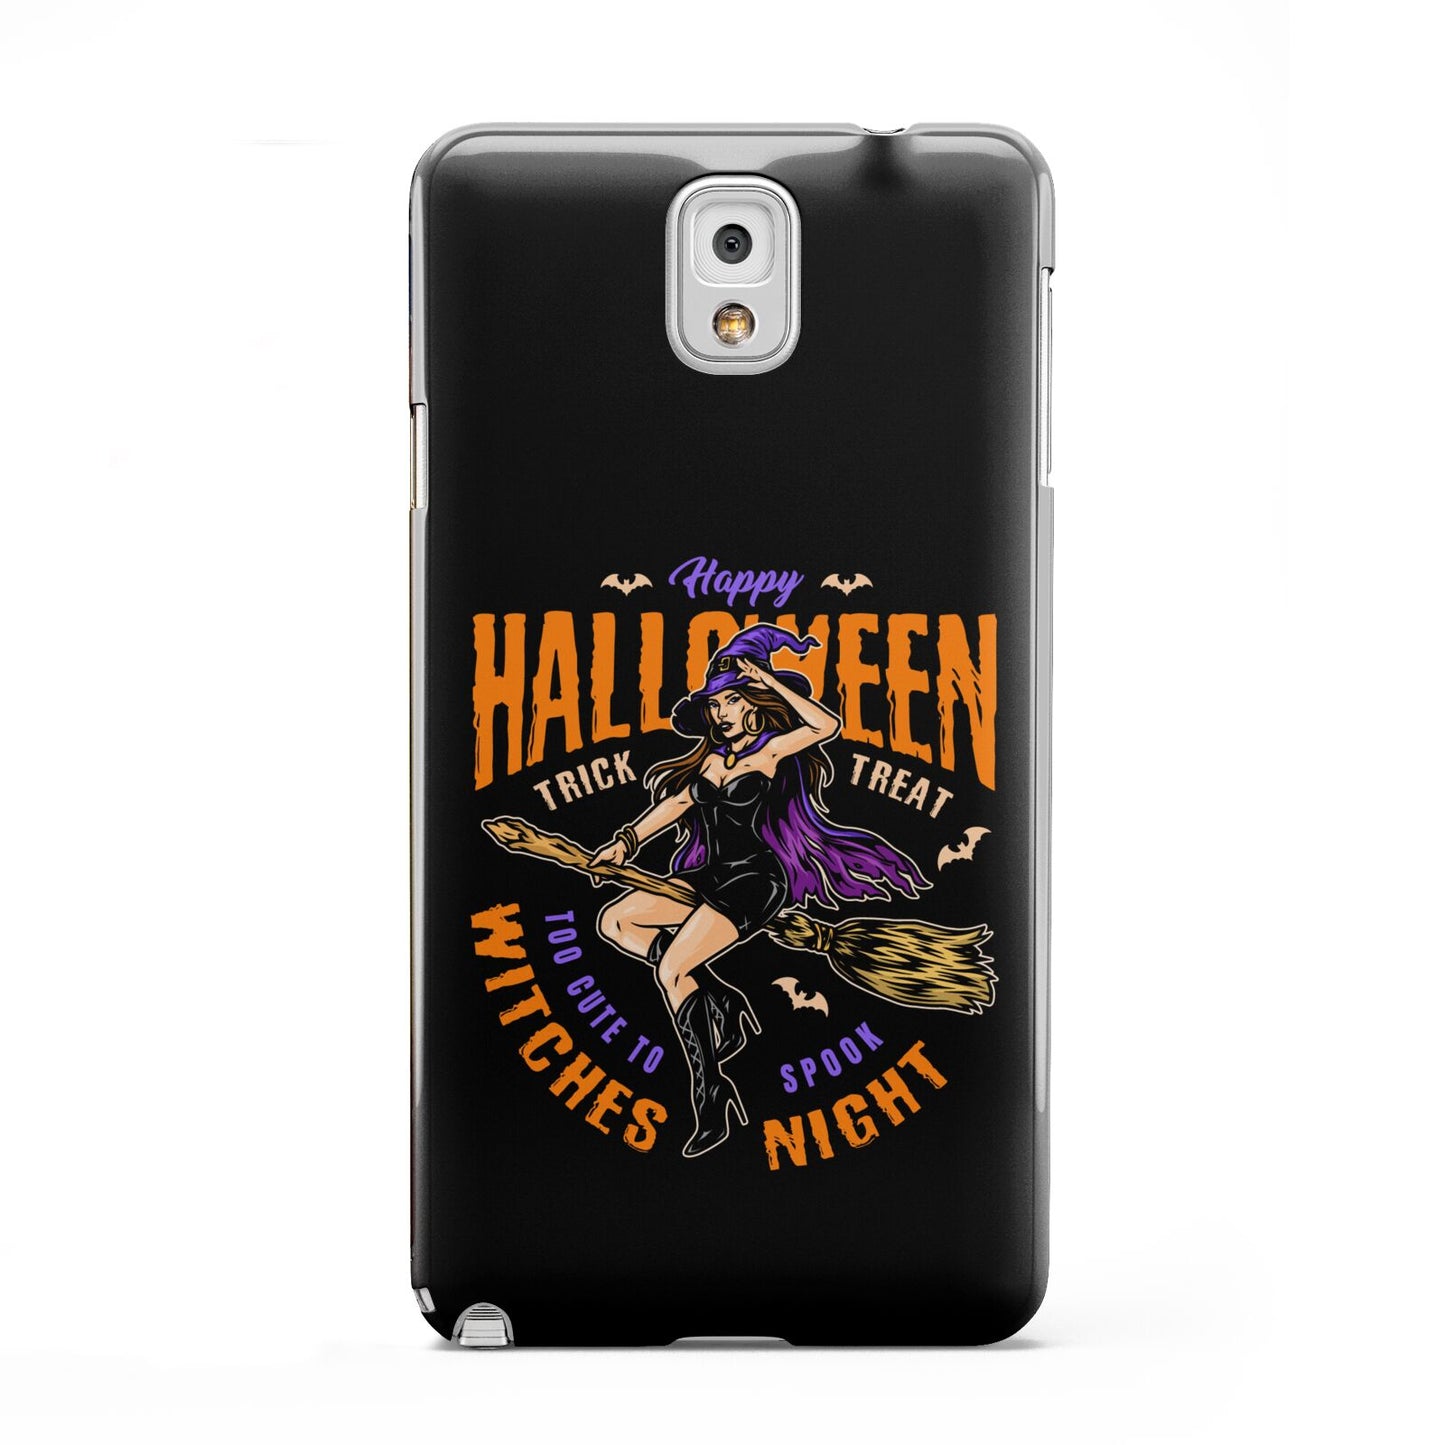 Witches Night Samsung Galaxy Note 3 Case